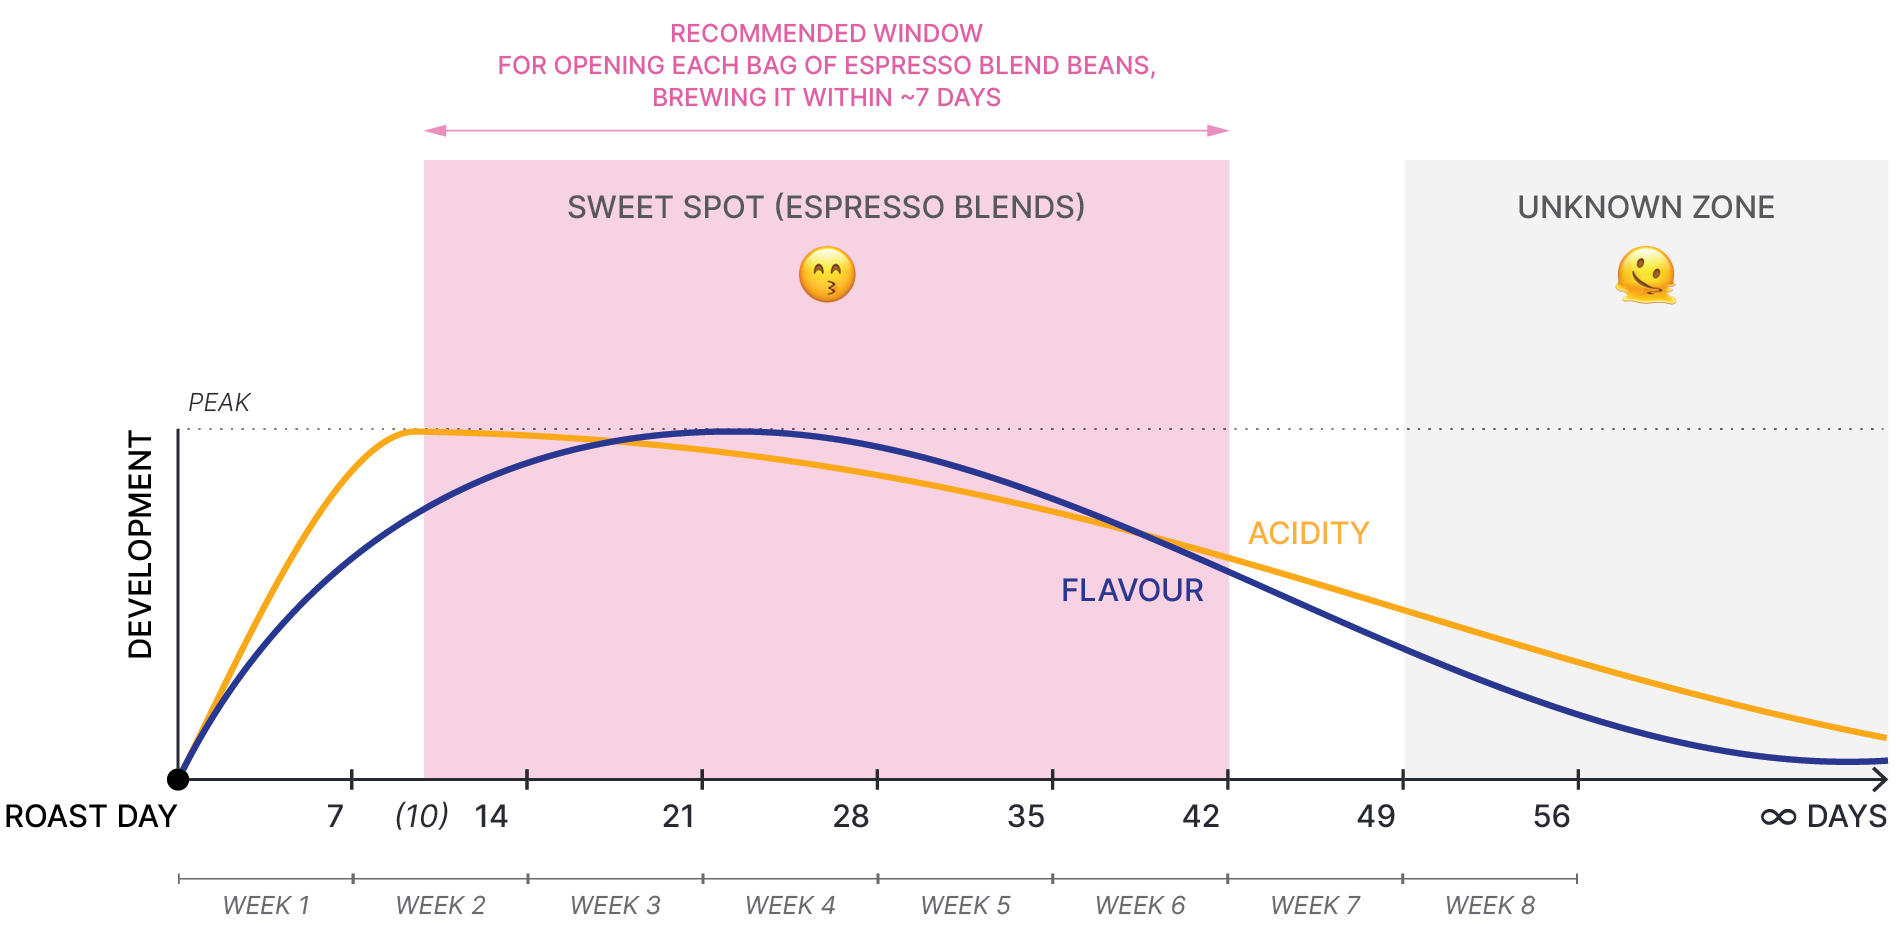 Graph showing the optimum brewing window for espresso blend whole beans, as described on text lines above.